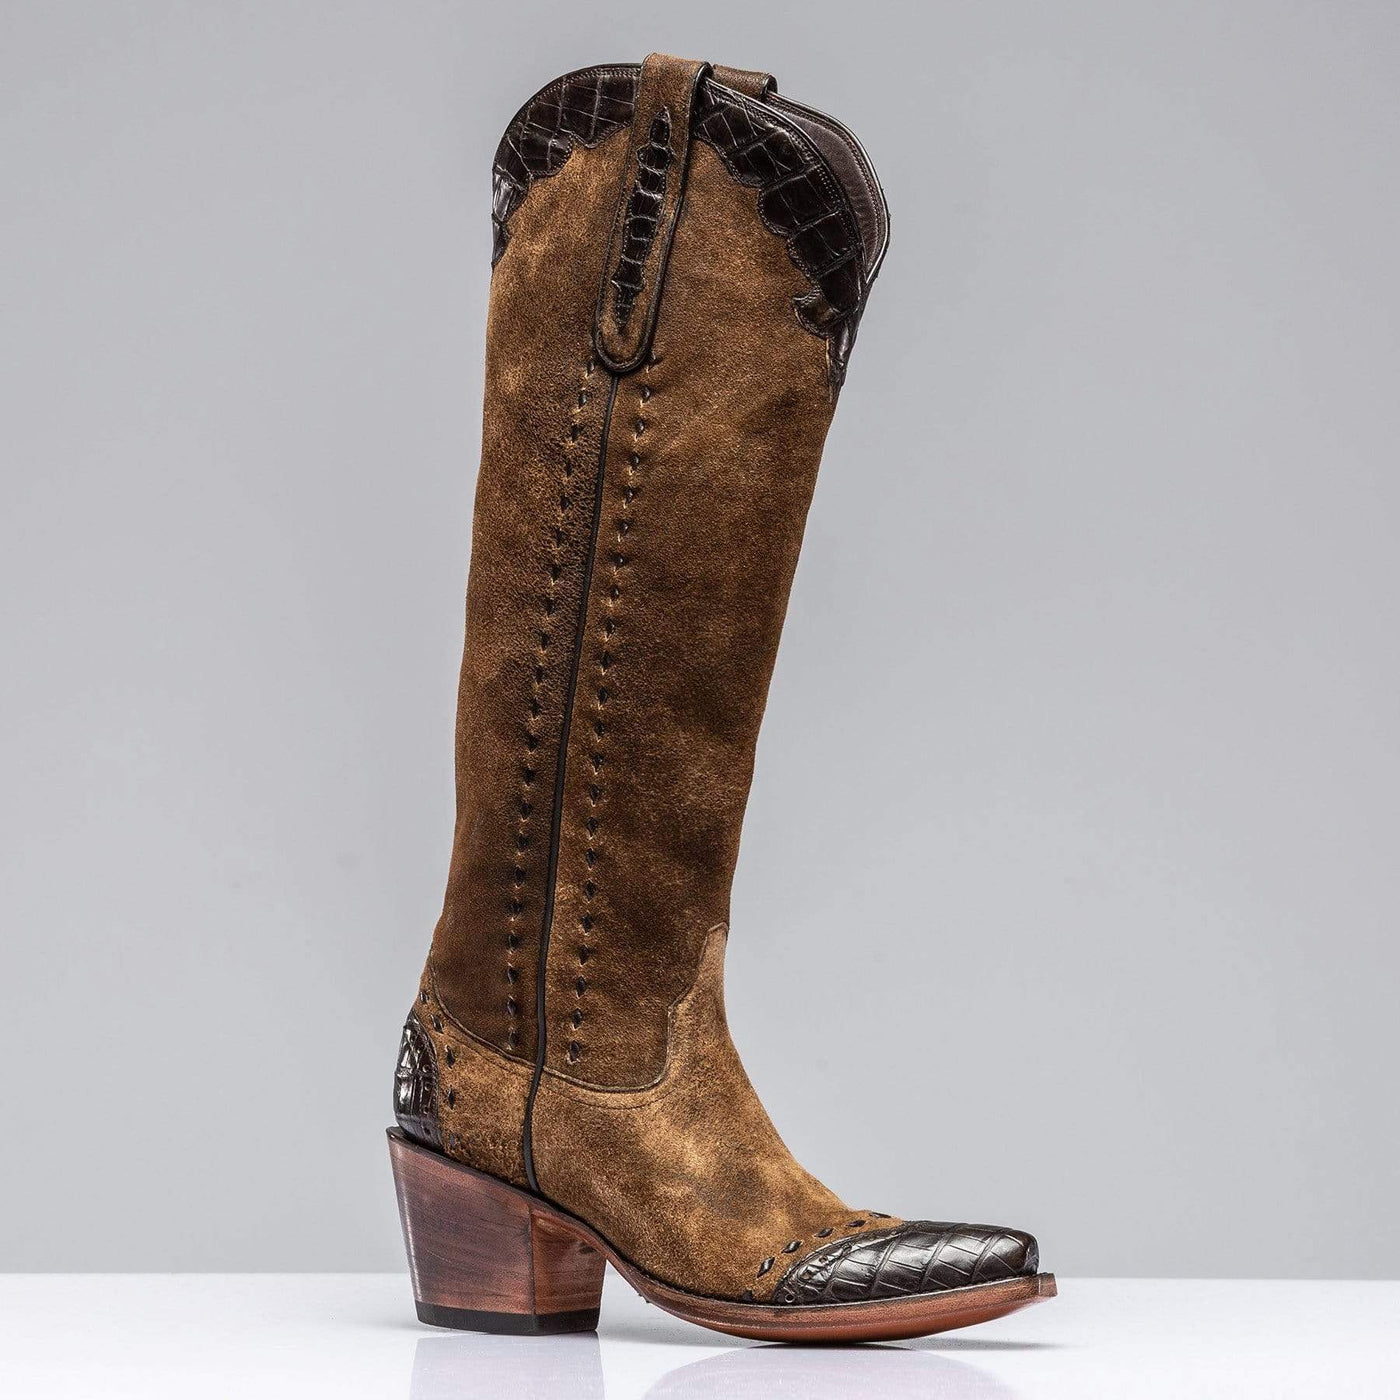 Tall Distressed Camel Boot - AXEL'S